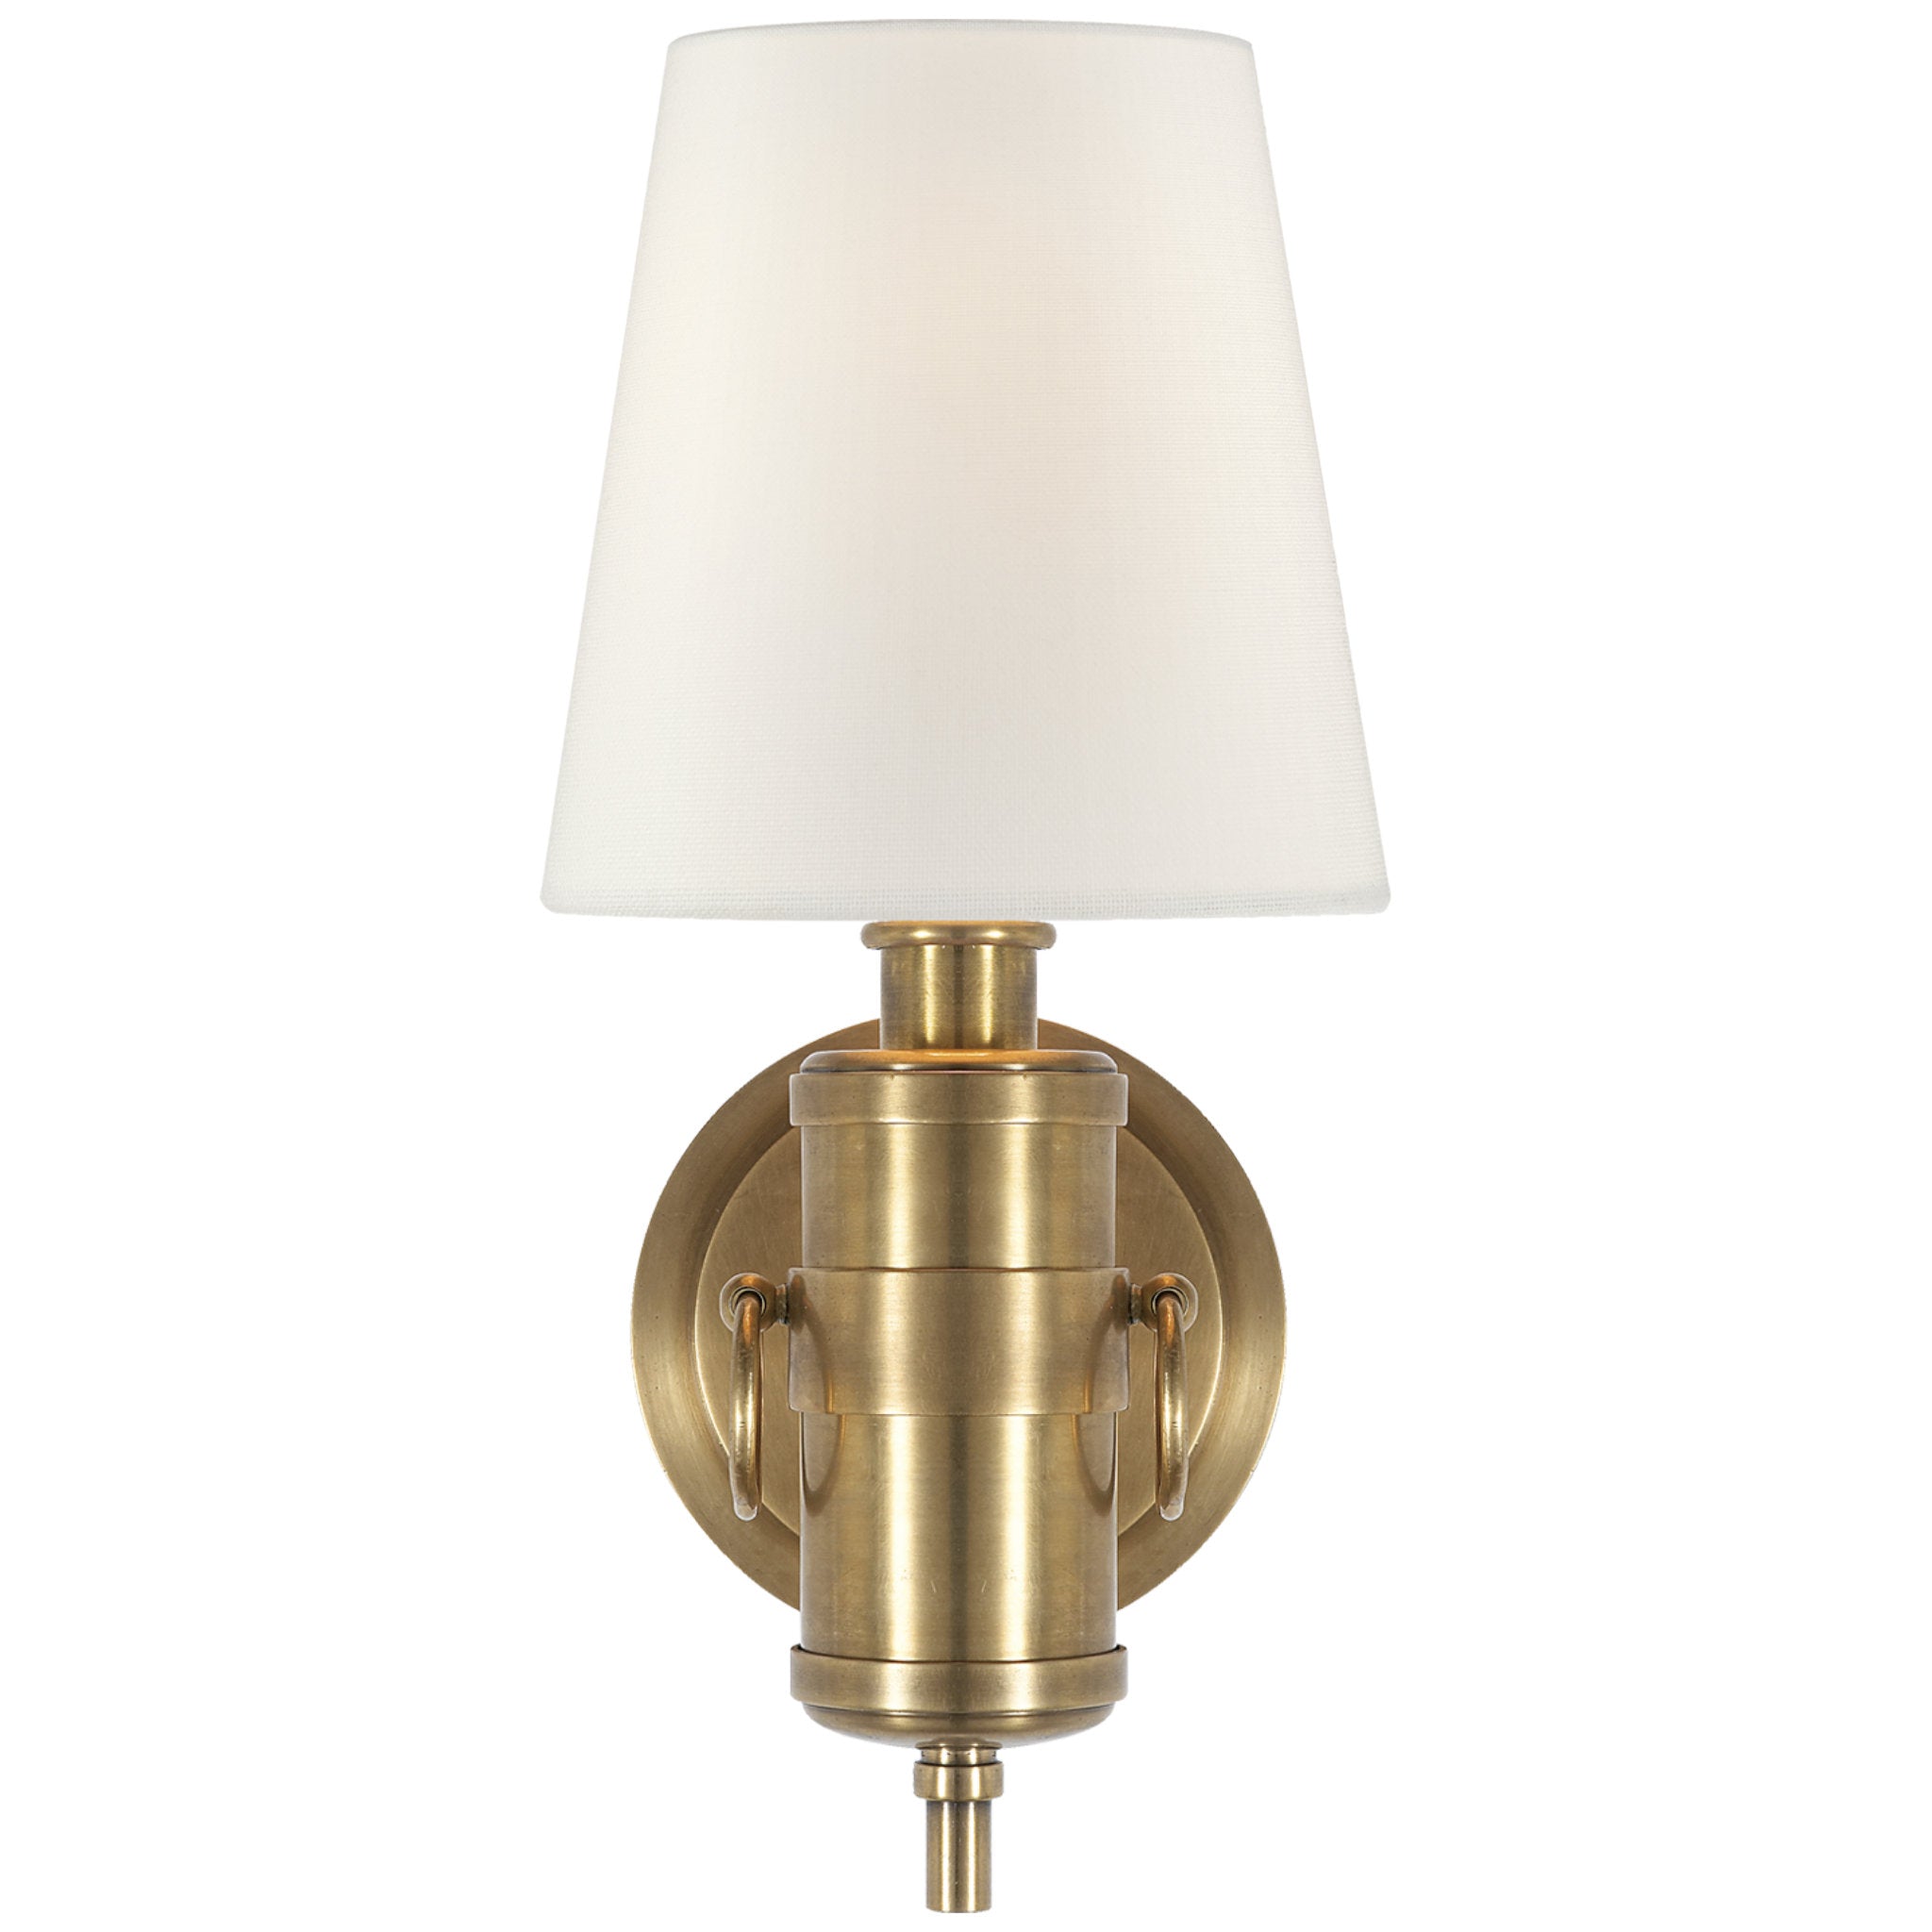 Thomas O'Brien Vendome Triple Sconce in Hand-Rubbed Antique Brass with